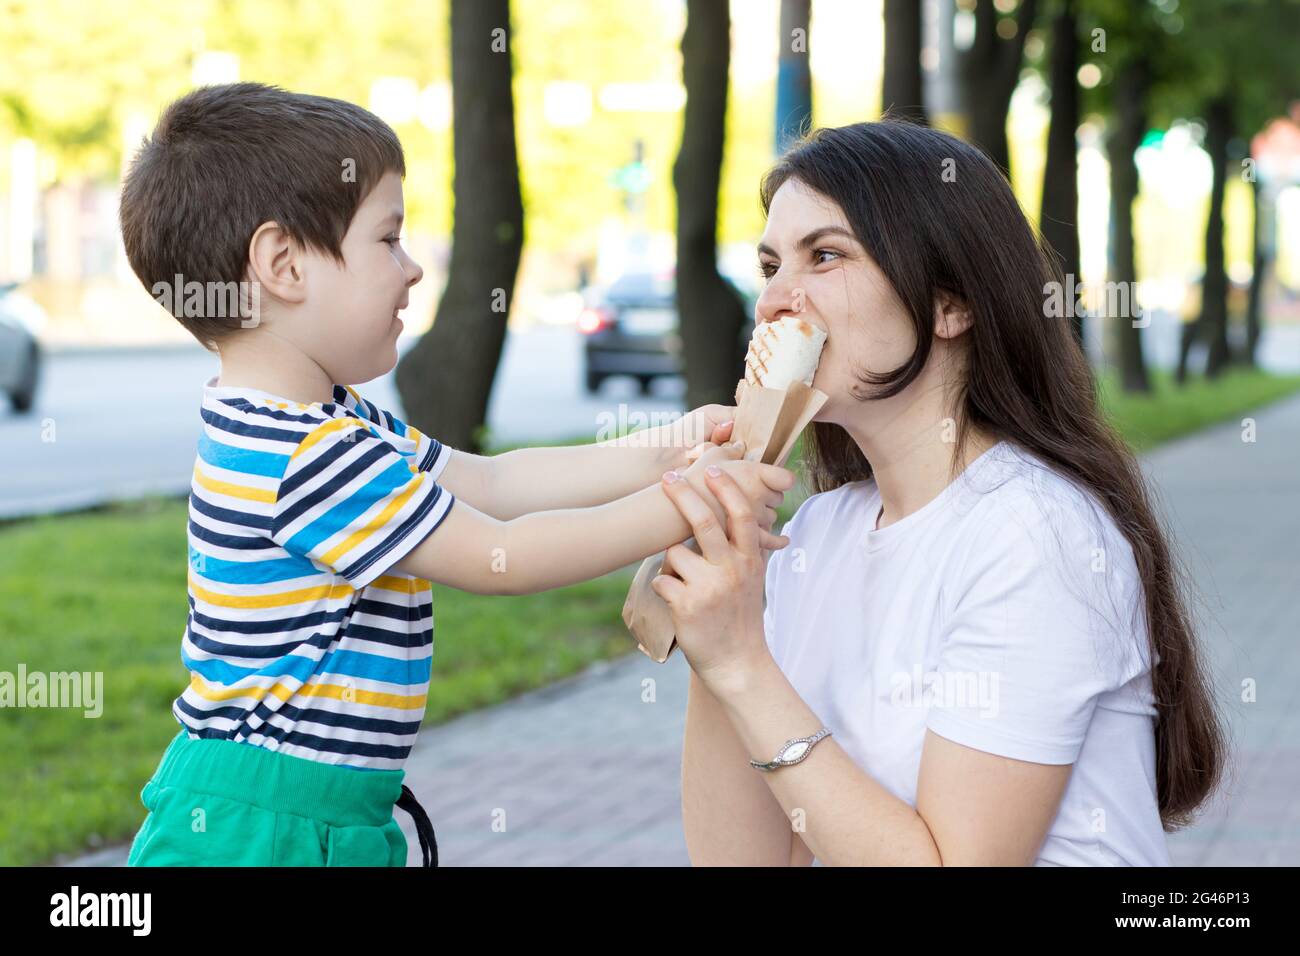 A baby boy feeds his mother a shaurma in the street. Advertising fast food and street food. Stock Photo